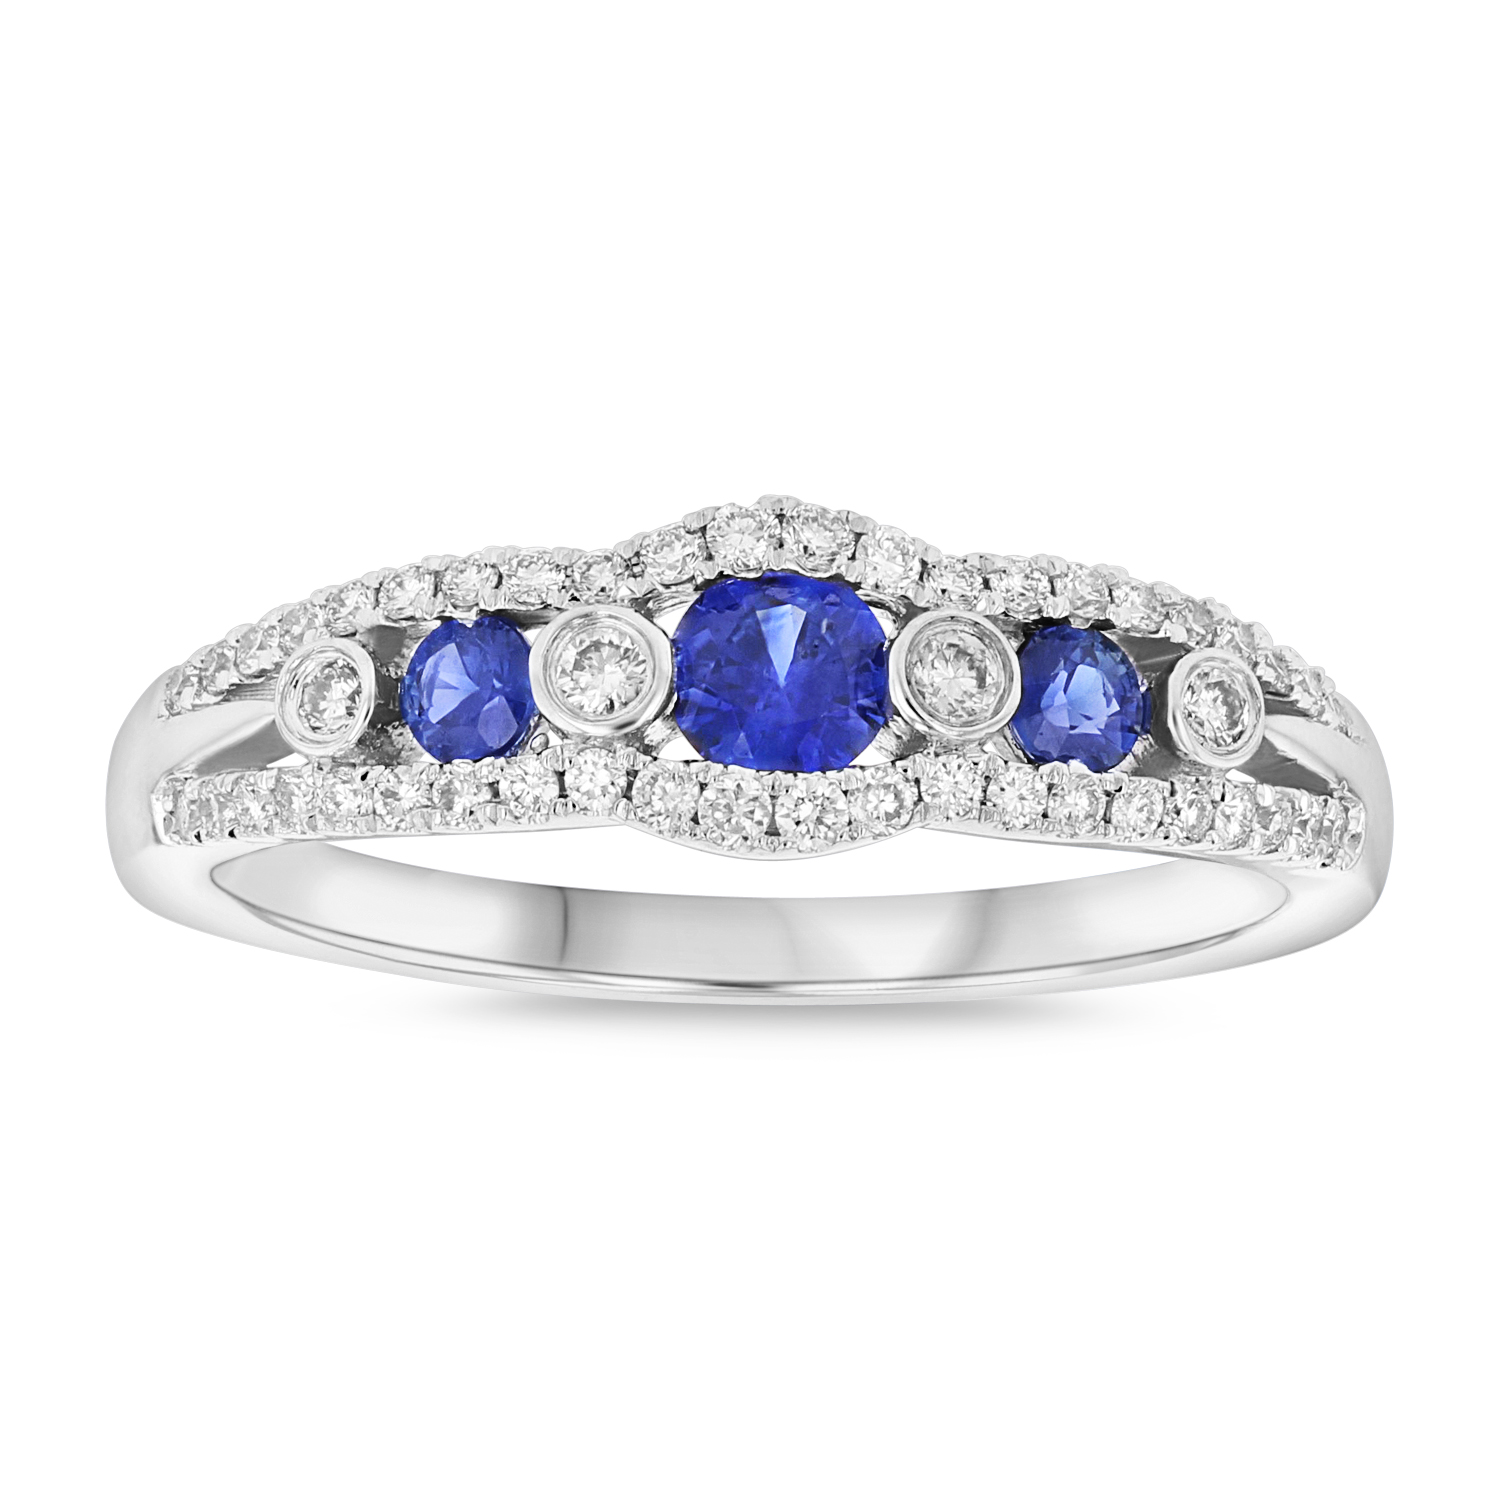 Diamond and sapphire Ring in 14k White gold